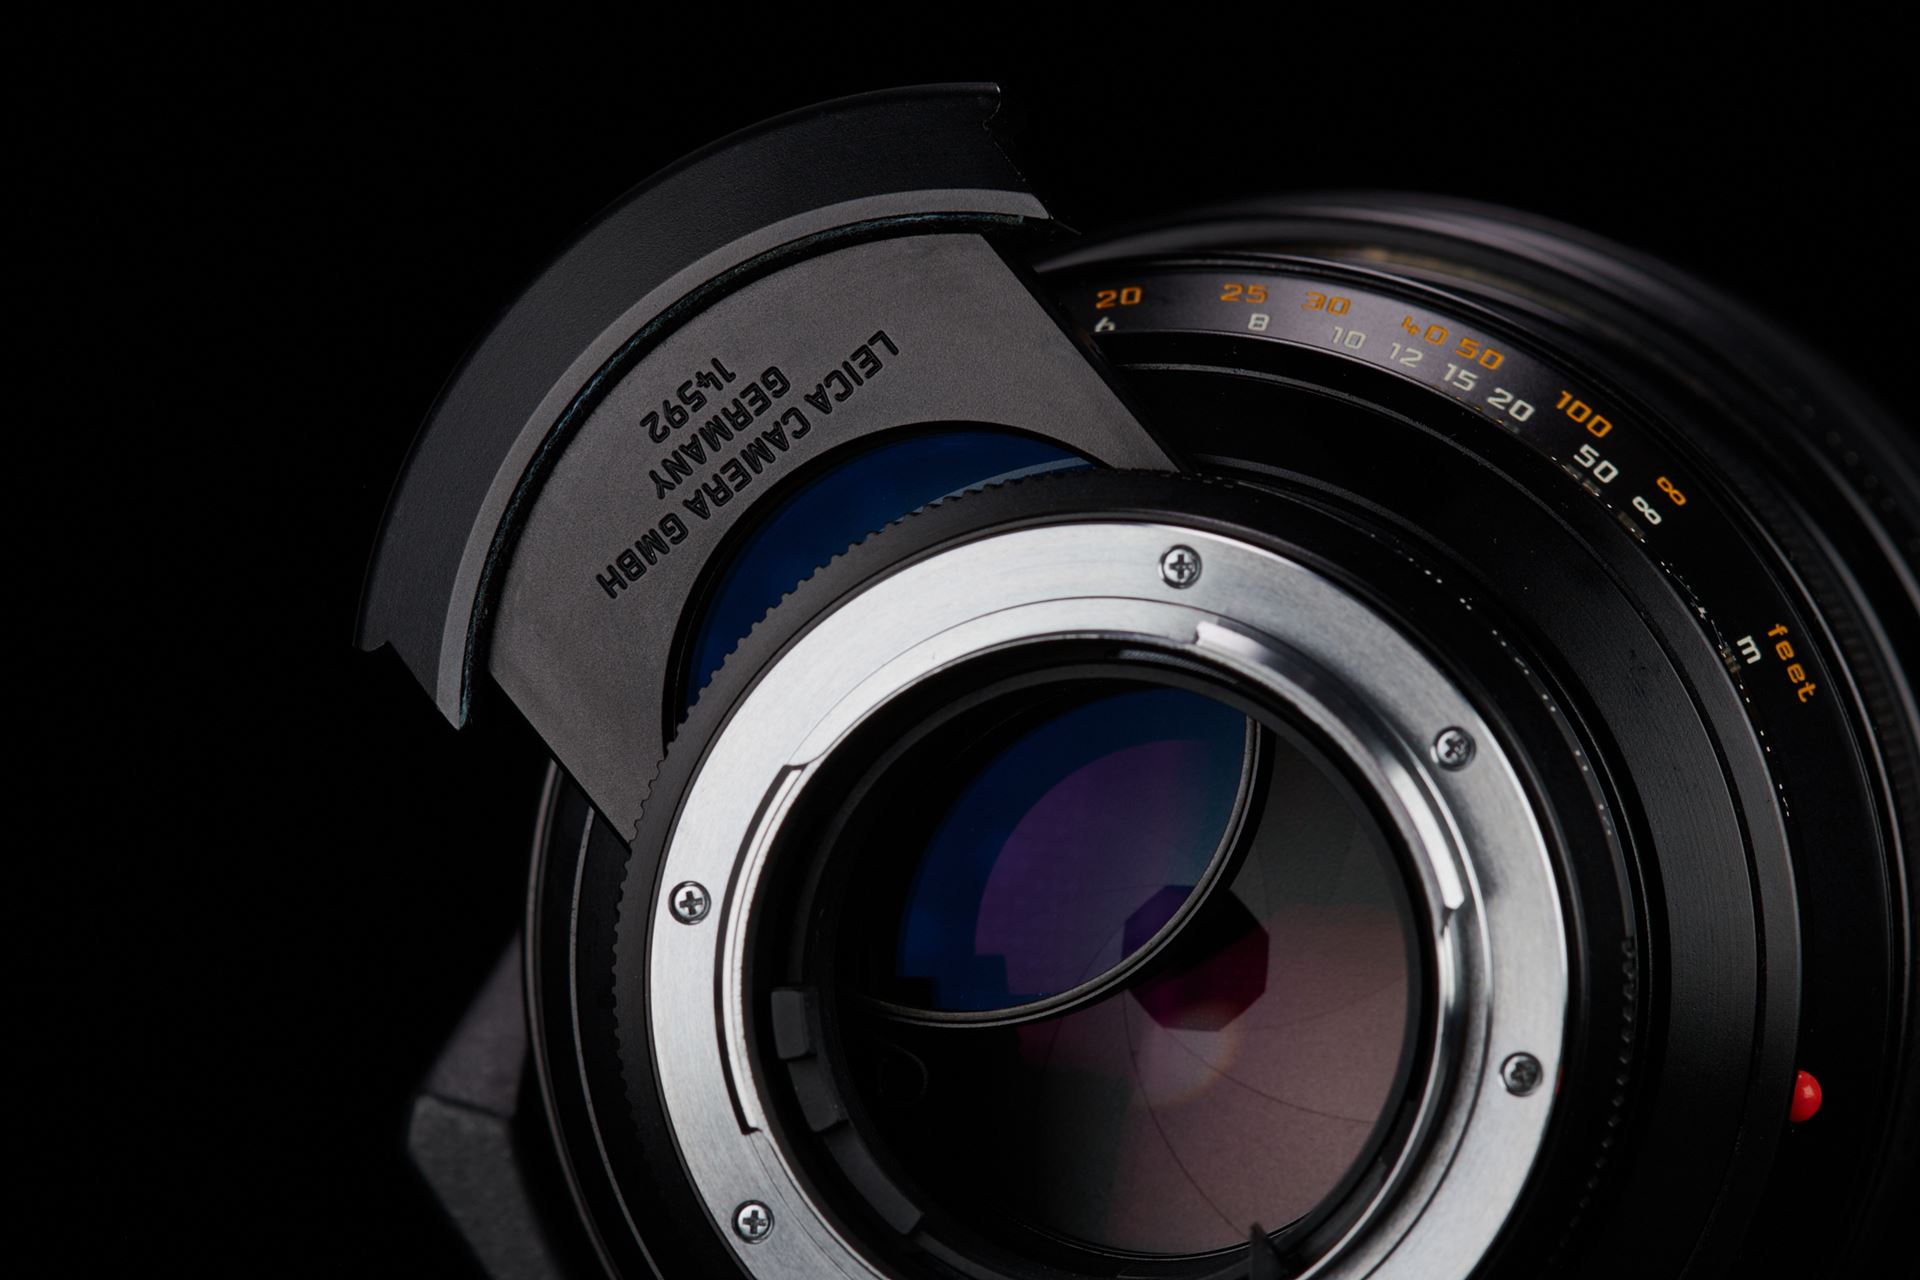 Picture of leica apo summicron-r 180mm f/2